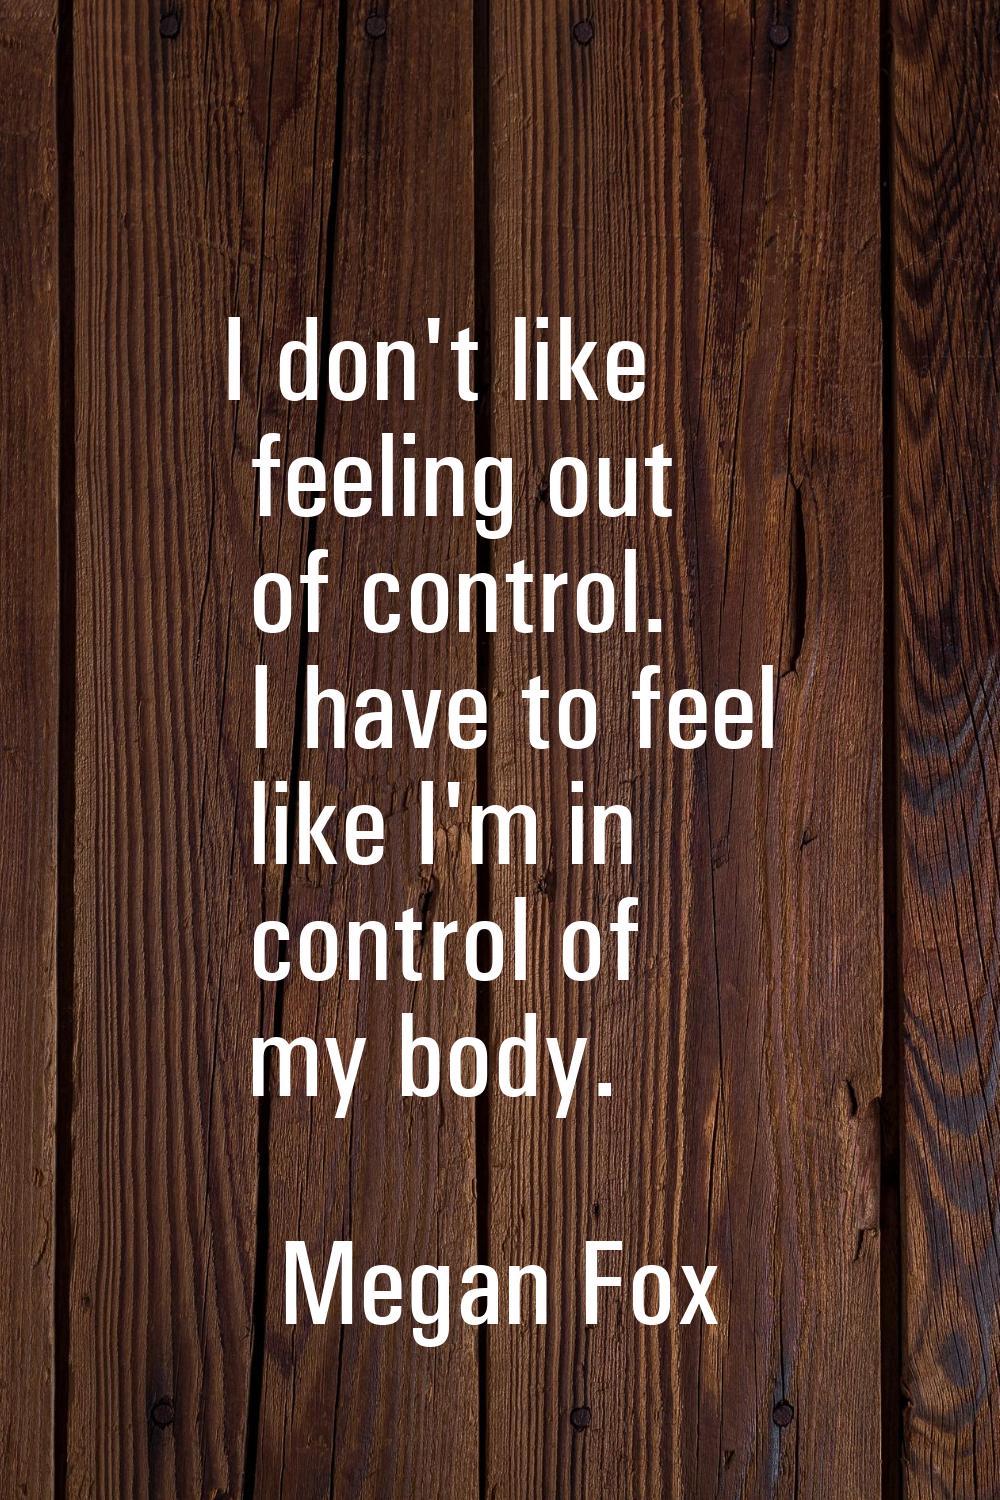 I don't like feeling out of control. I have to feel like I'm in control of my body.